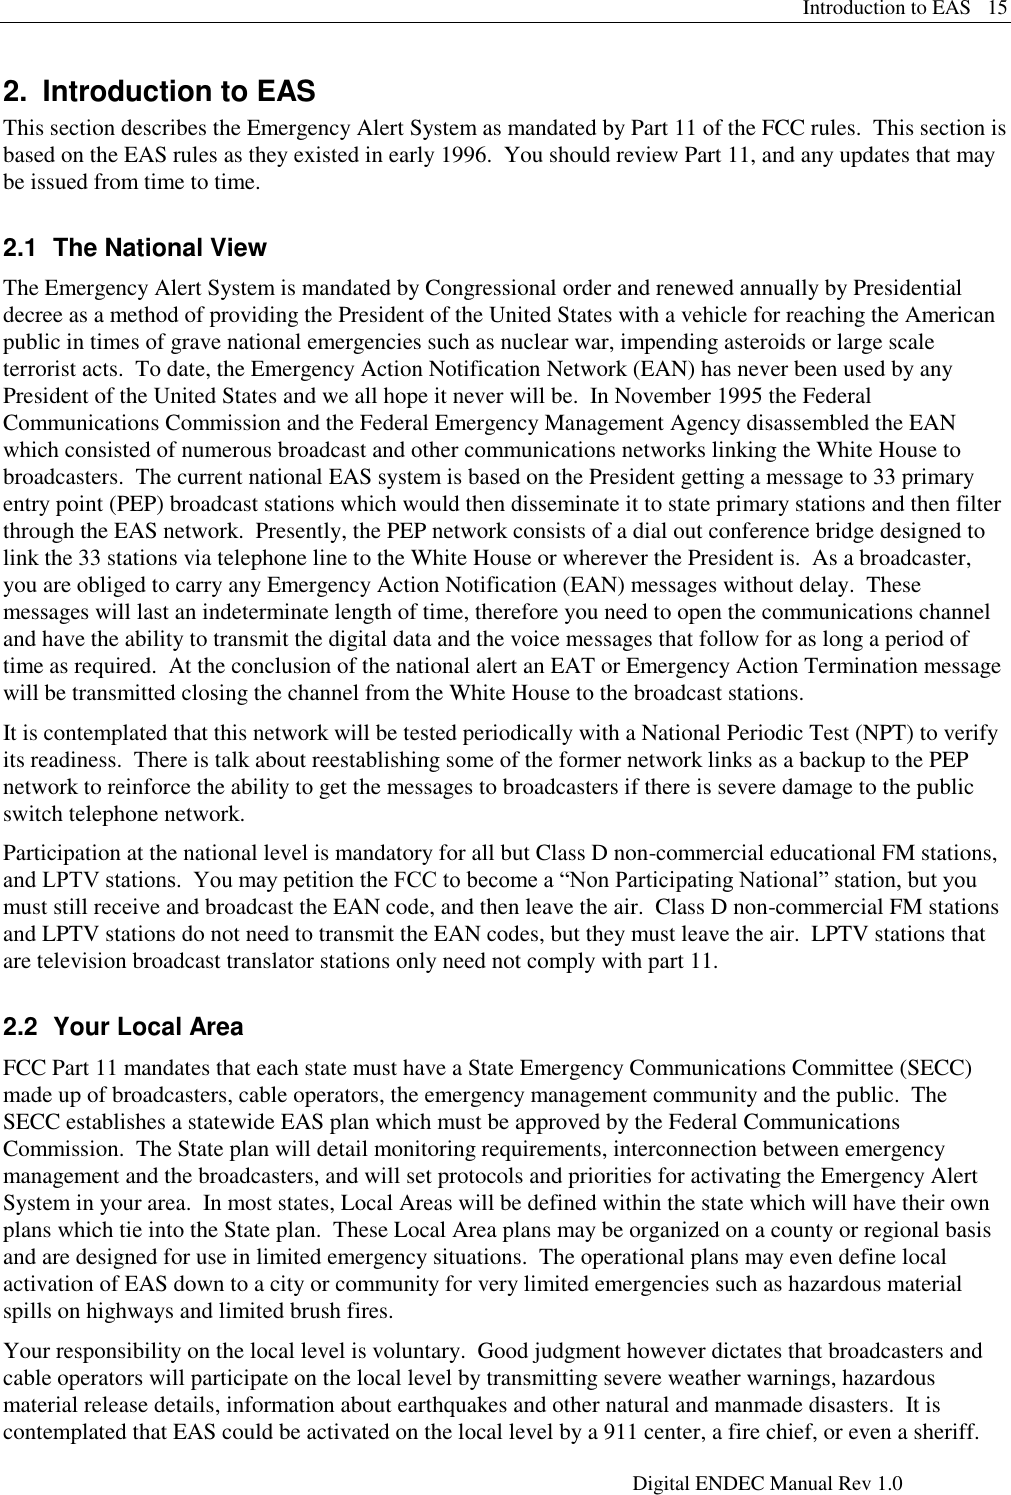 Introduction to EAS   15     Digital ENDEC Manual Rev 1.0 2.  Introduction to EAS This section describes the Emergency Alert System as mandated by Part 11 of the FCC rules.  This section is based on the EAS rules as they existed in early 1996.  You should review Part 11, and any updates that may be issued from time to time. 2.1  The National View The Emergency Alert System is mandated by Congressional order and renewed annually by Presidential decree as a method of providing the President of the United States with a vehicle for reaching the American public in times of grave national emergencies such as nuclear war, impending asteroids or large scale terrorist acts.  To date, the Emergency Action Notification Network (EAN) has never been used by any President of the United States and we all hope it never will be.  In November 1995 the Federal Communications Commission and the Federal Emergency Management Agency disassembled the EAN which consisted of numerous broadcast and other communications networks linking the White House to broadcasters.  The current national EAS system is based on the President getting a message to 33 primary entry point (PEP) broadcast stations which would then disseminate it to state primary stations and then filter through the EAS network.  Presently, the PEP network consists of a dial out conference bridge designed to link the 33 stations via telephone line to the White House or wherever the President is.  As a broadcaster, you are obliged to carry any Emergency Action Notification (EAN) messages without delay.  These messages will last an indeterminate length of time, therefore you need to open the communications channel and have the ability to transmit the digital data and the voice messages that follow for as long a period of time as required.  At the conclusion of the national alert an EAT or Emergency Action Termination message will be transmitted closing the channel from the White House to the broadcast stations. It is contemplated that this network will be tested periodically with a National Periodic Test (NPT) to verify its readiness.  There is talk about reestablishing some of the former network links as a backup to the PEP network to reinforce the ability to get the messages to broadcasters if there is severe damage to the public switch telephone network. Participation at the national level is mandatory for all but Class D non-commercial educational FM stations, and LPTV stations.  You may petition the FCC to become a “Non Participating National” station, but you must still receive and broadcast the EAN code, and then leave the air.  Class D non-commercial FM stations and LPTV stations do not need to transmit the EAN codes, but they must leave the air.  LPTV stations that are television broadcast translator stations only need not comply with part 11. 2.2  Your Local Area FCC Part 11 mandates that each state must have a State Emergency Communications Committee (SECC) made up of broadcasters, cable operators, the emergency management community and the public.  The SECC establishes a statewide EAS plan which must be approved by the Federal Communications Commission.  The State plan will detail monitoring requirements, interconnection between emergency management and the broadcasters, and will set protocols and priorities for activating the Emergency Alert System in your area.  In most states, Local Areas will be defined within the state which will have their own plans which tie into the State plan.  These Local Area plans may be organized on a county or regional basis and are designed for use in limited emergency situations.  The operational plans may even define local activation of EAS down to a city or community for very limited emergencies such as hazardous material spills on highways and limited brush fires.   Your responsibility on the local level is voluntary.  Good judgment however dictates that broadcasters and cable operators will participate on the local level by transmitting severe weather warnings, hazardous material release details, information about earthquakes and other natural and manmade disasters.  It is contemplated that EAS could be activated on the local level by a 911 center, a fire chief, or even a sheriff.  